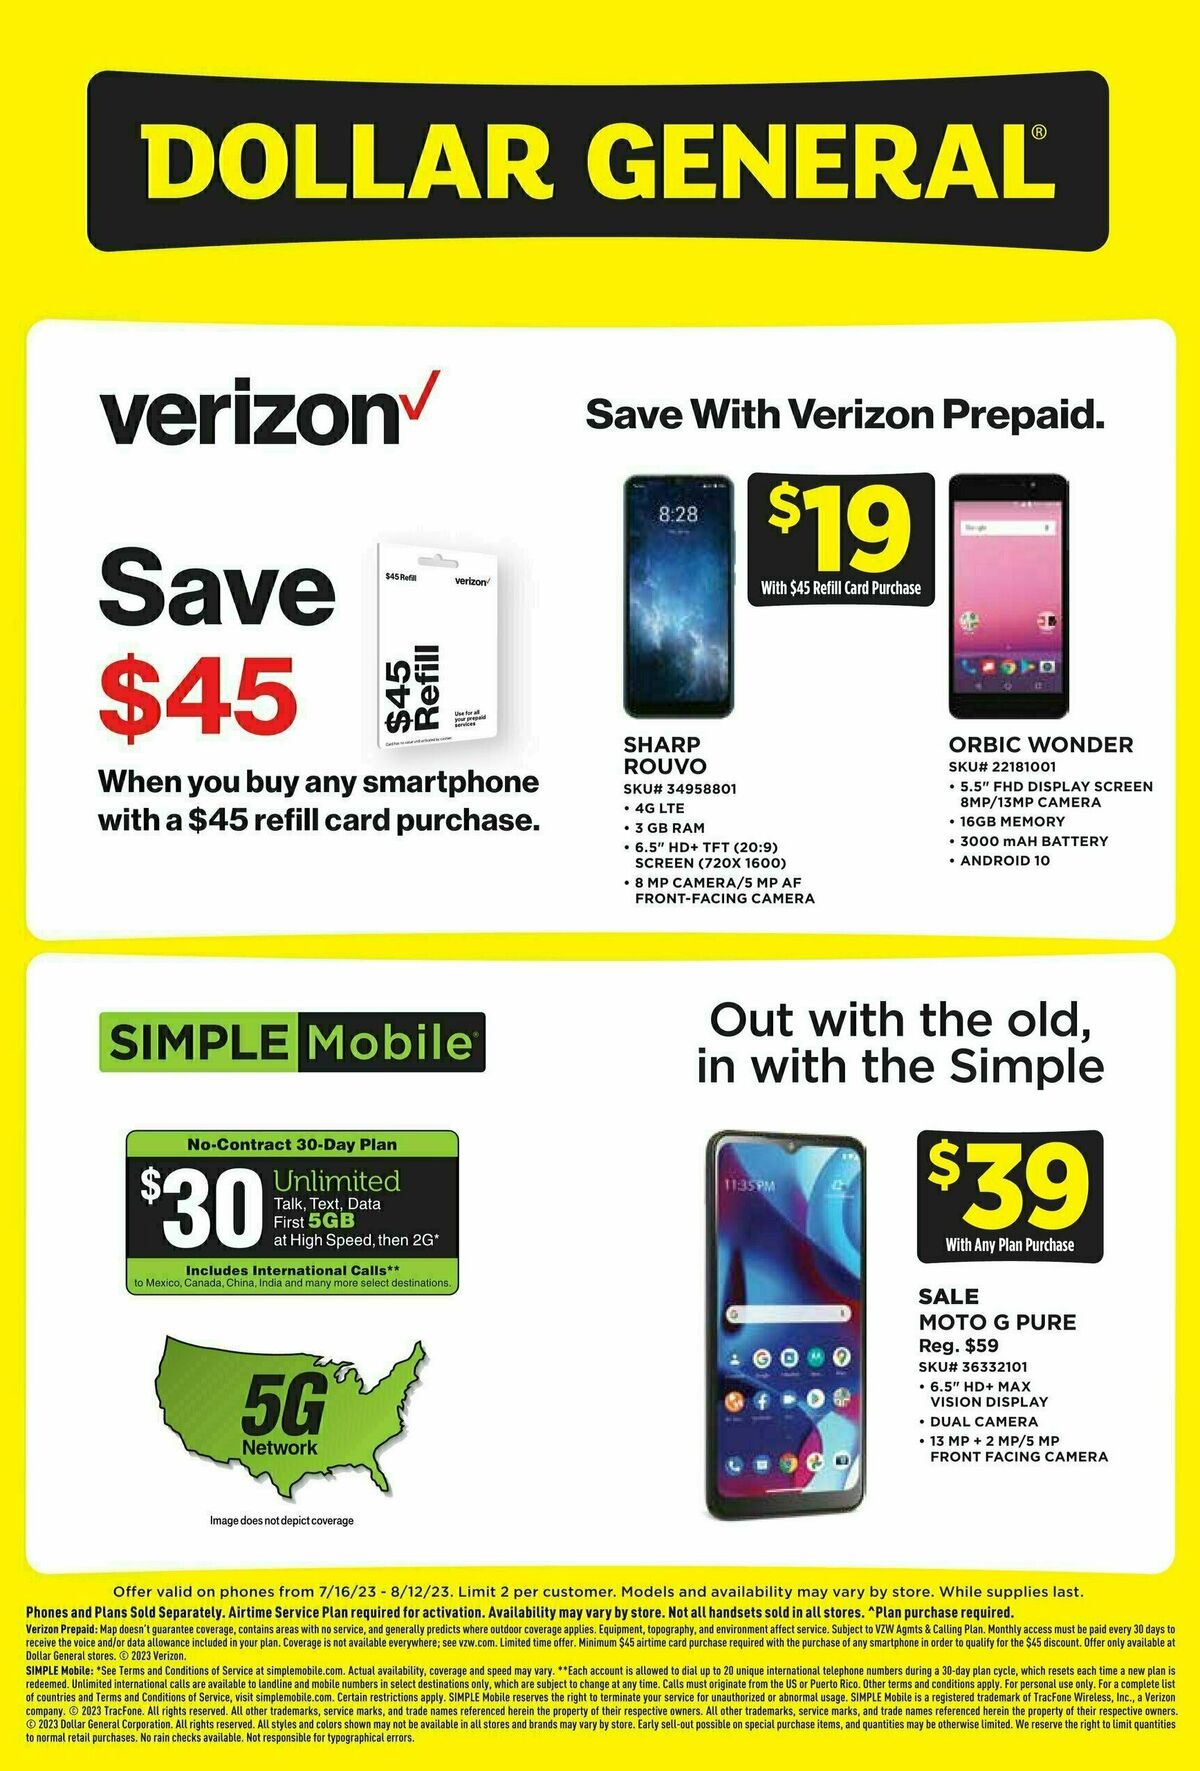 Dollar General Weekly Wireless Specials Weekly Ad from July 16